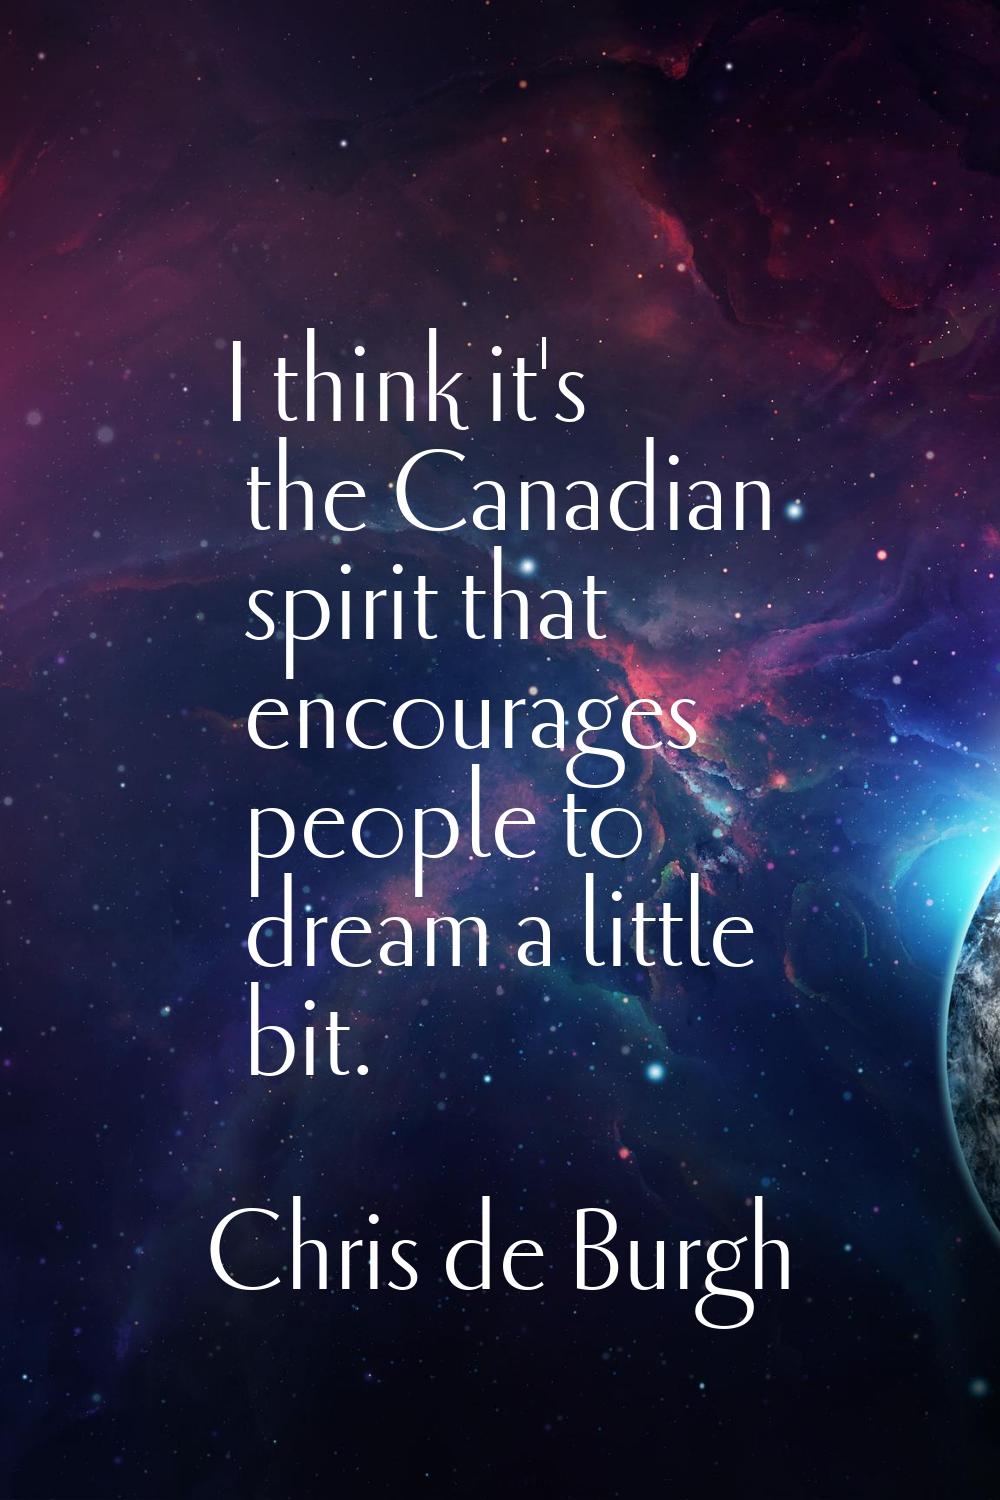 I think it's the Canadian spirit that encourages people to dream a little bit.